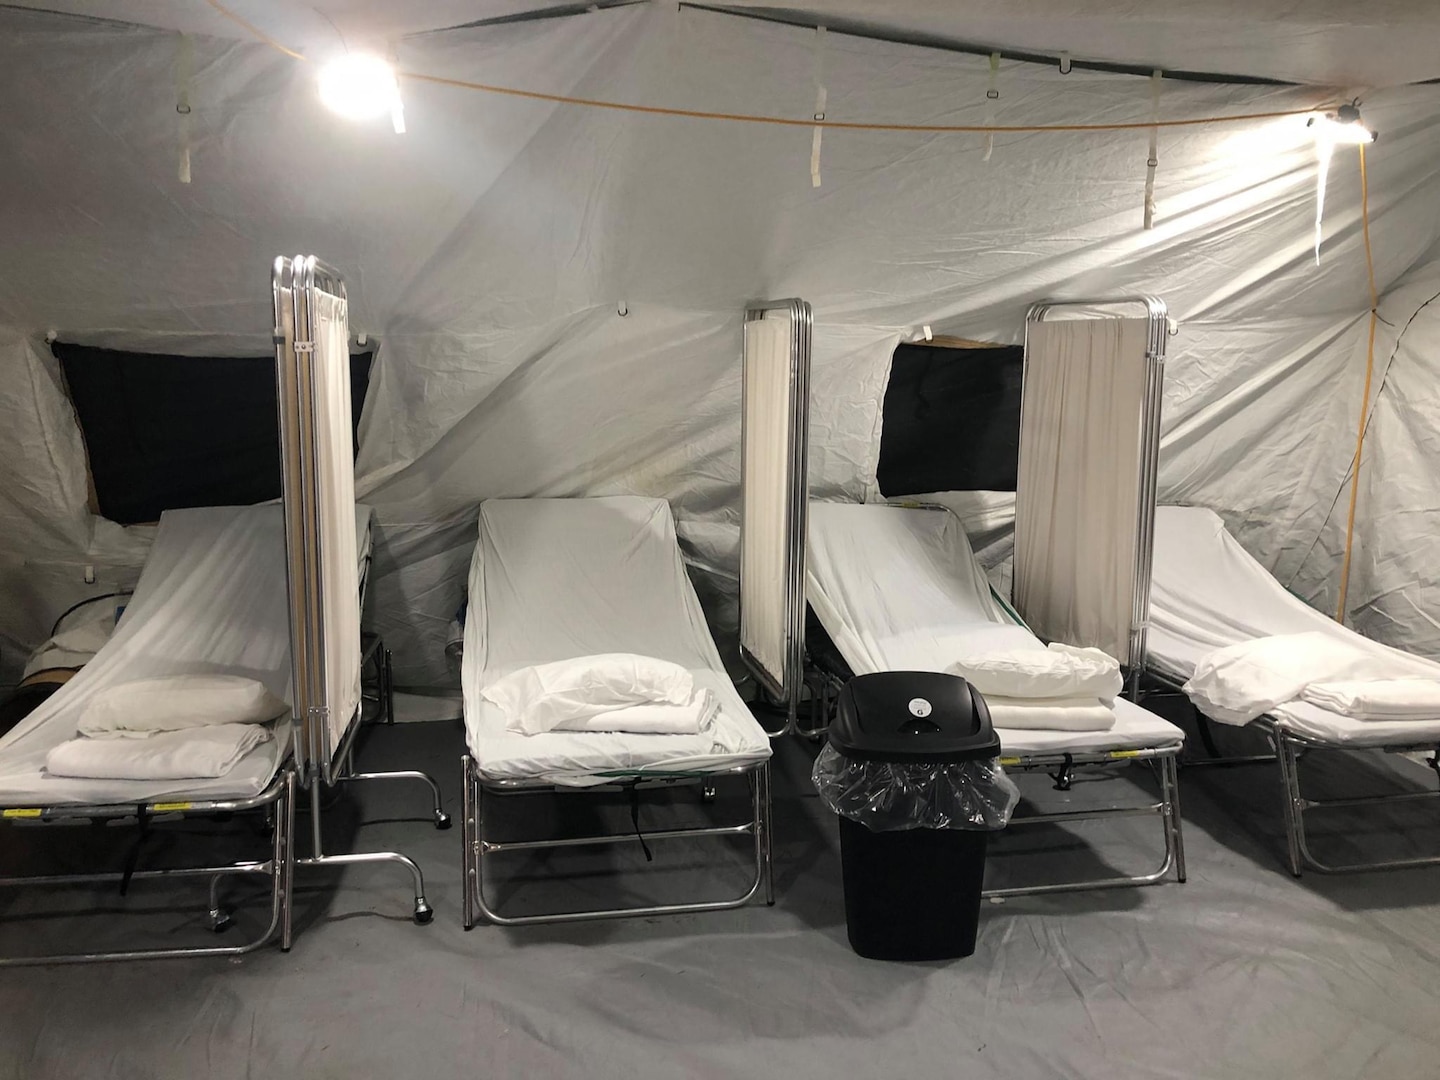 A temporary patient care area in a former military tent in Clinton, South Carolina.